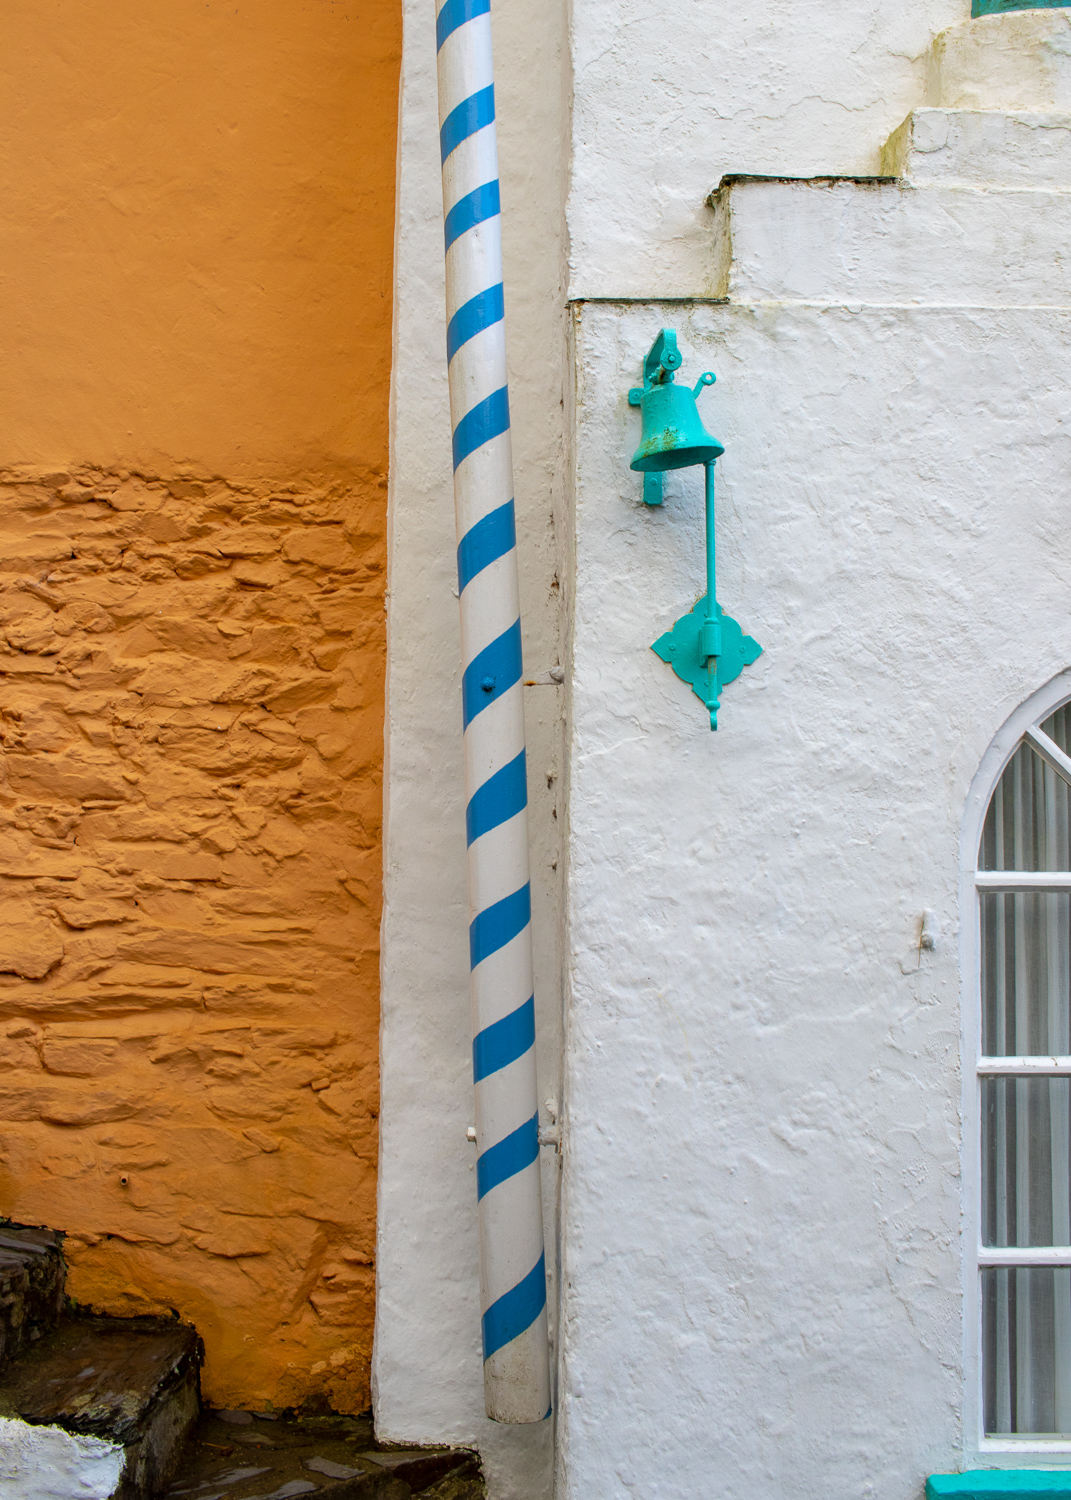 Portmeirion village in north wales